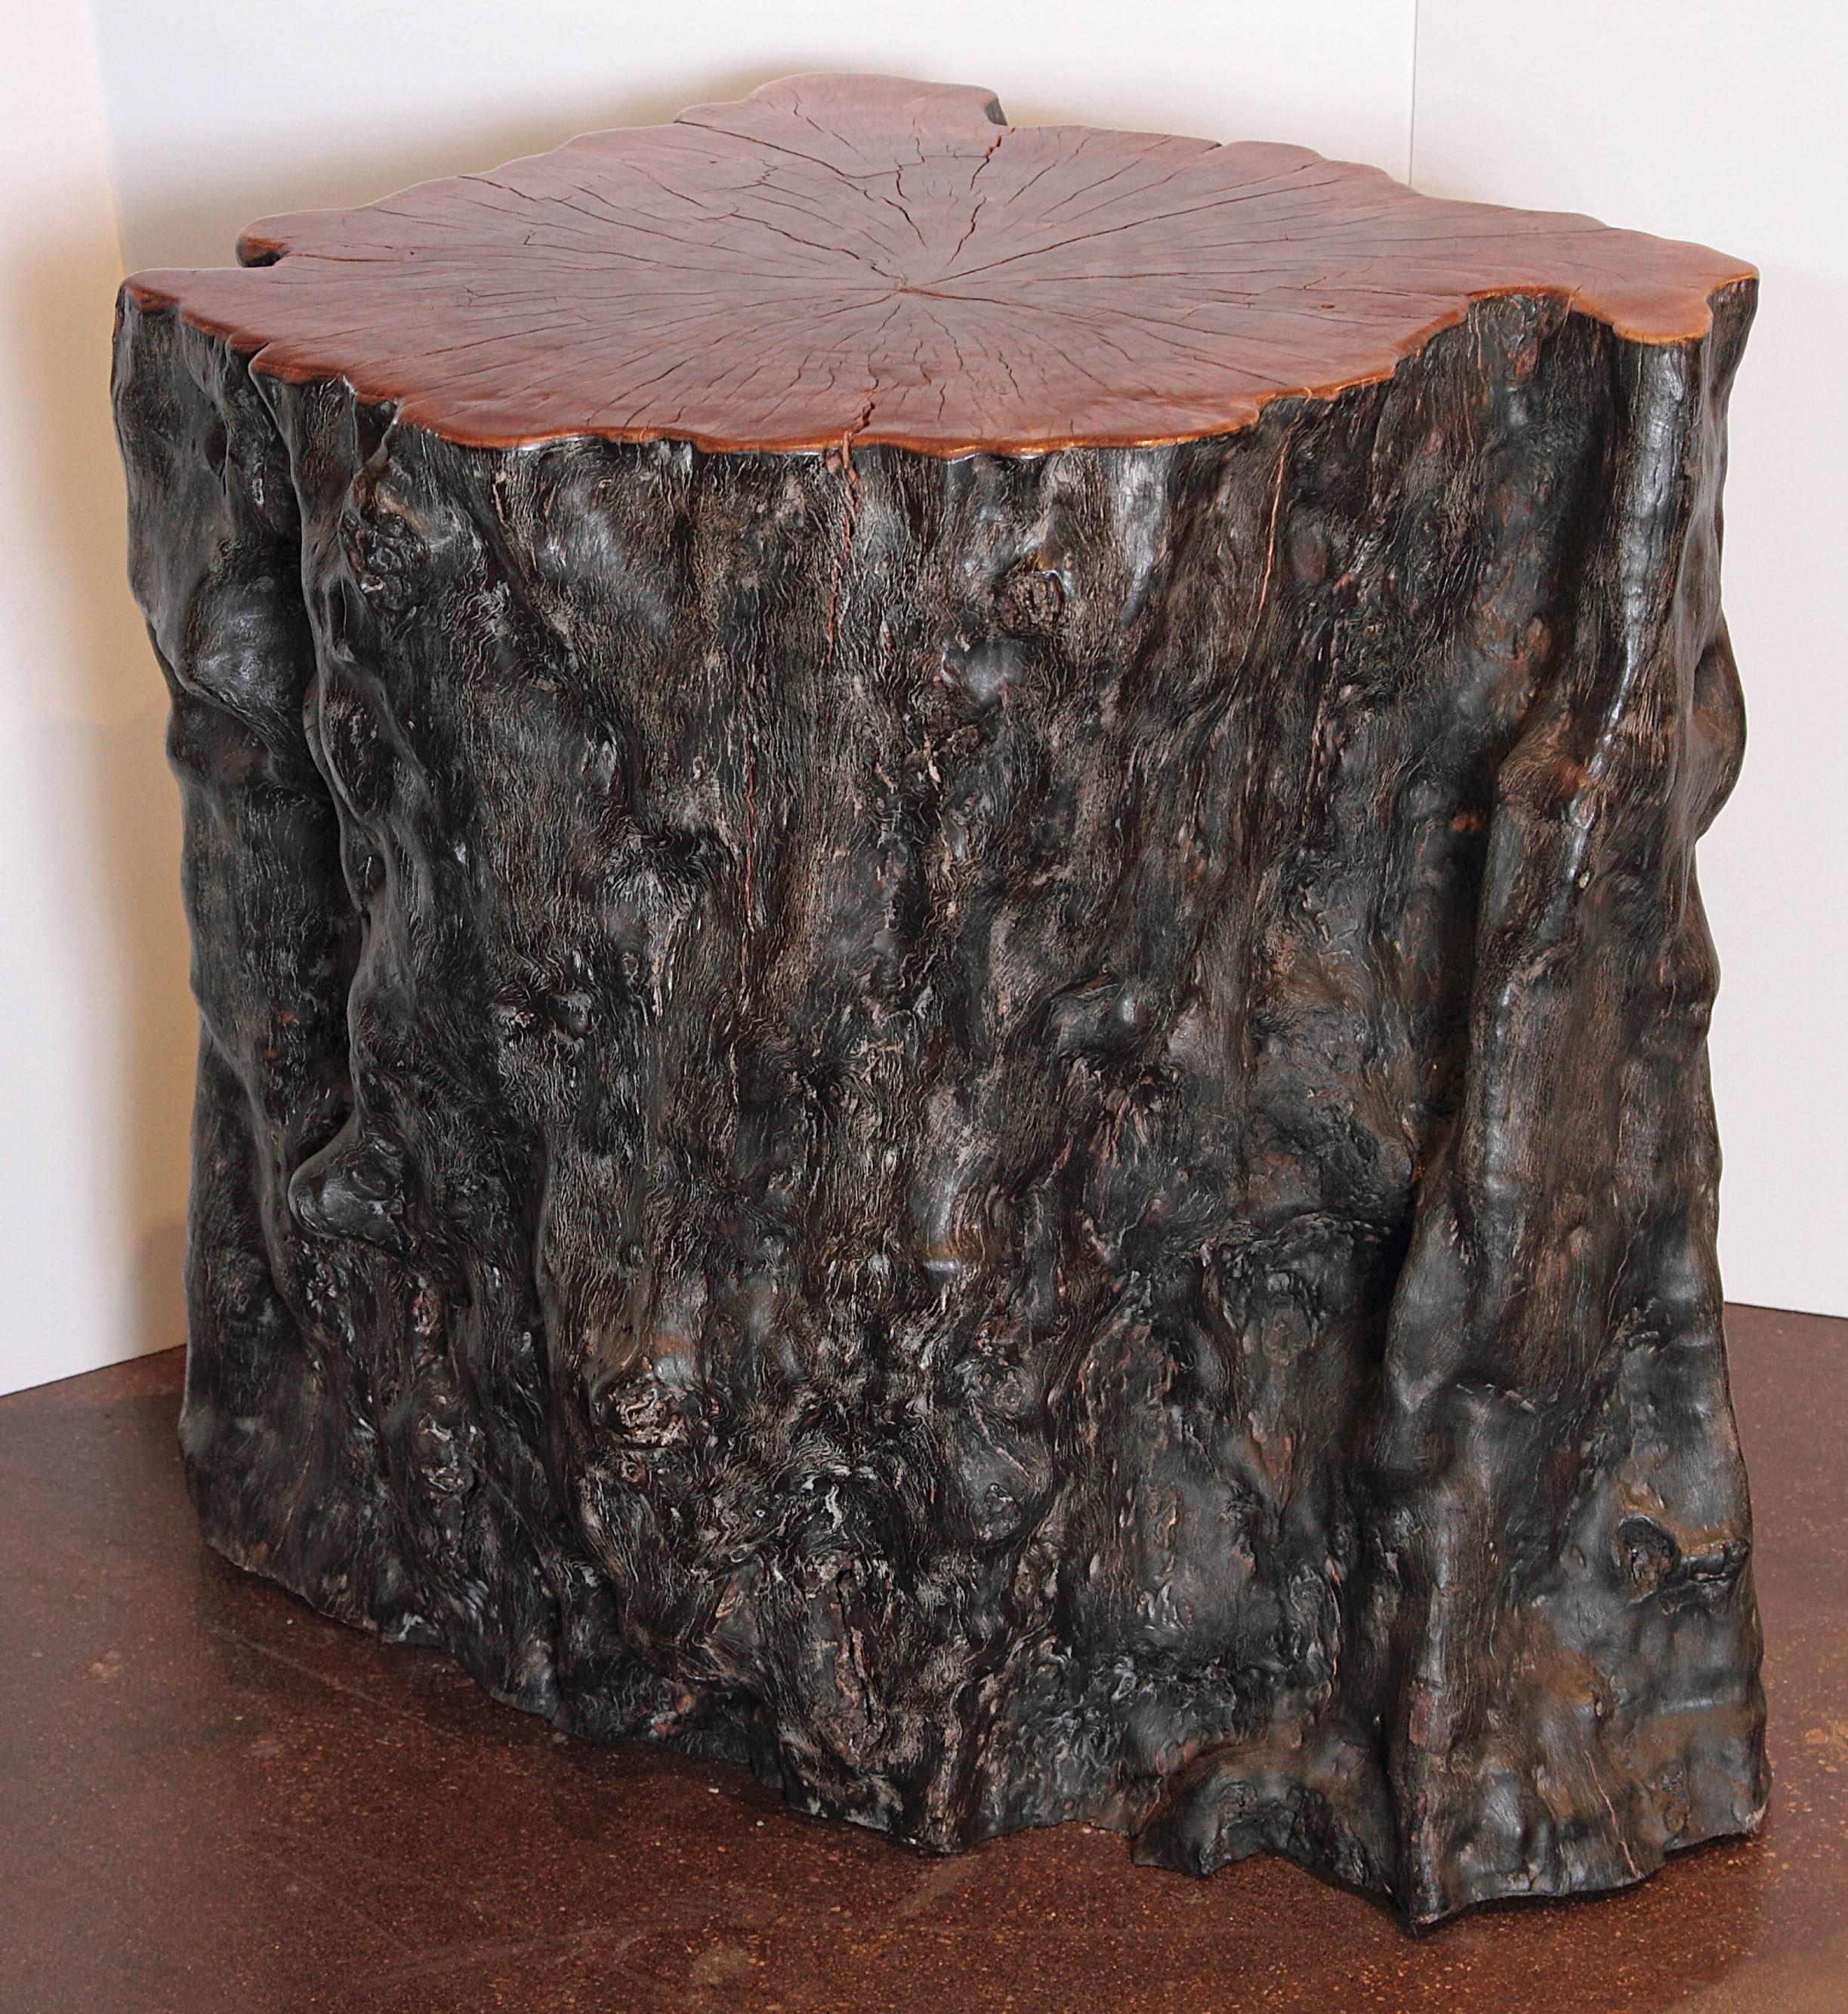 Organic lychee wood stump.
Use as table base, side table or pedestal.